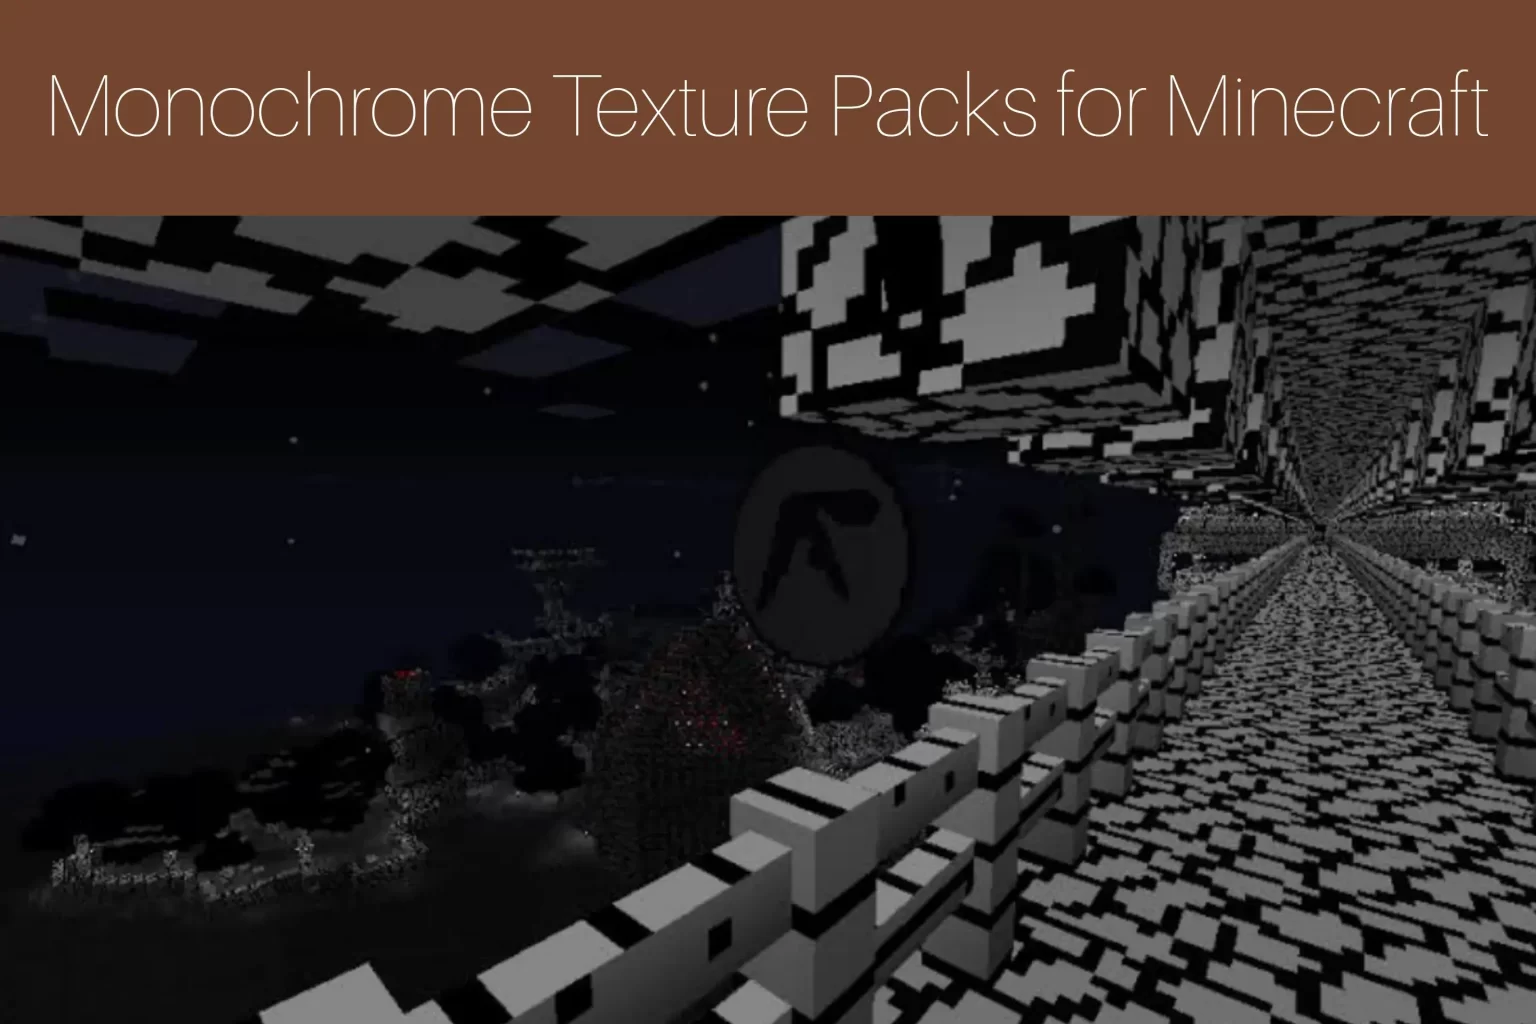 Monochrome Texture Packs for Minecraft